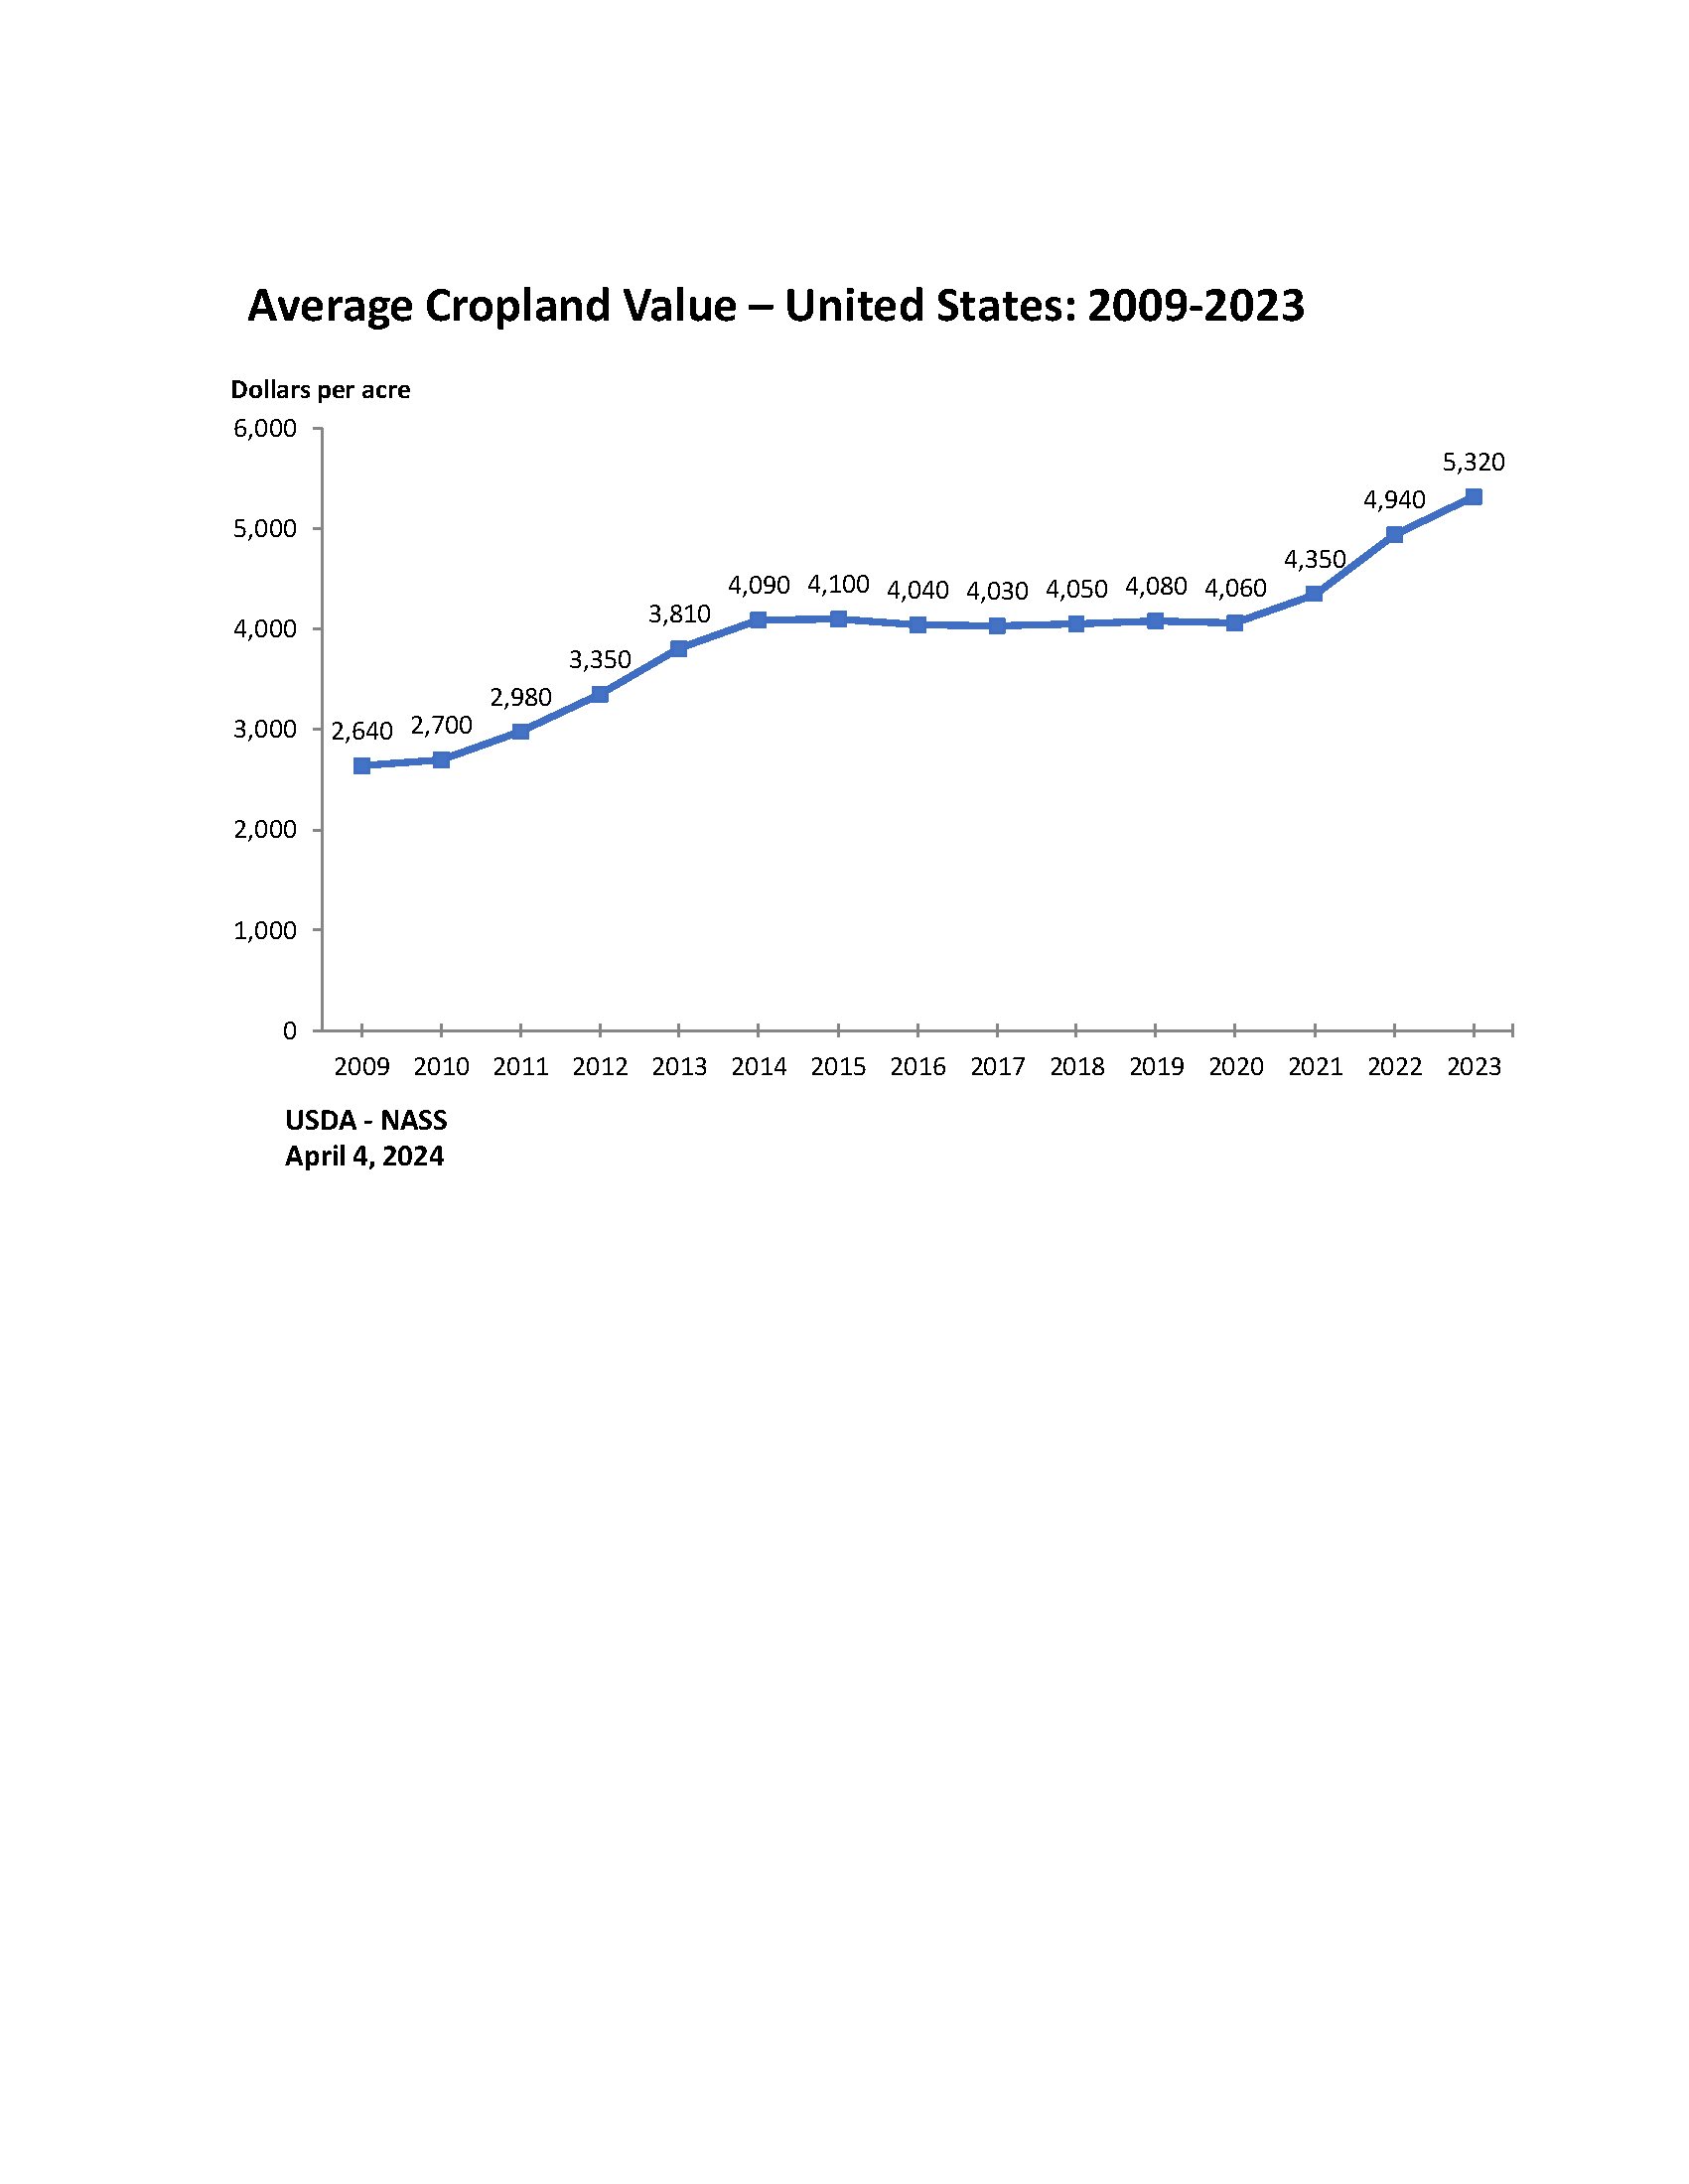 Land Values: Average Cropland Value by Year, US